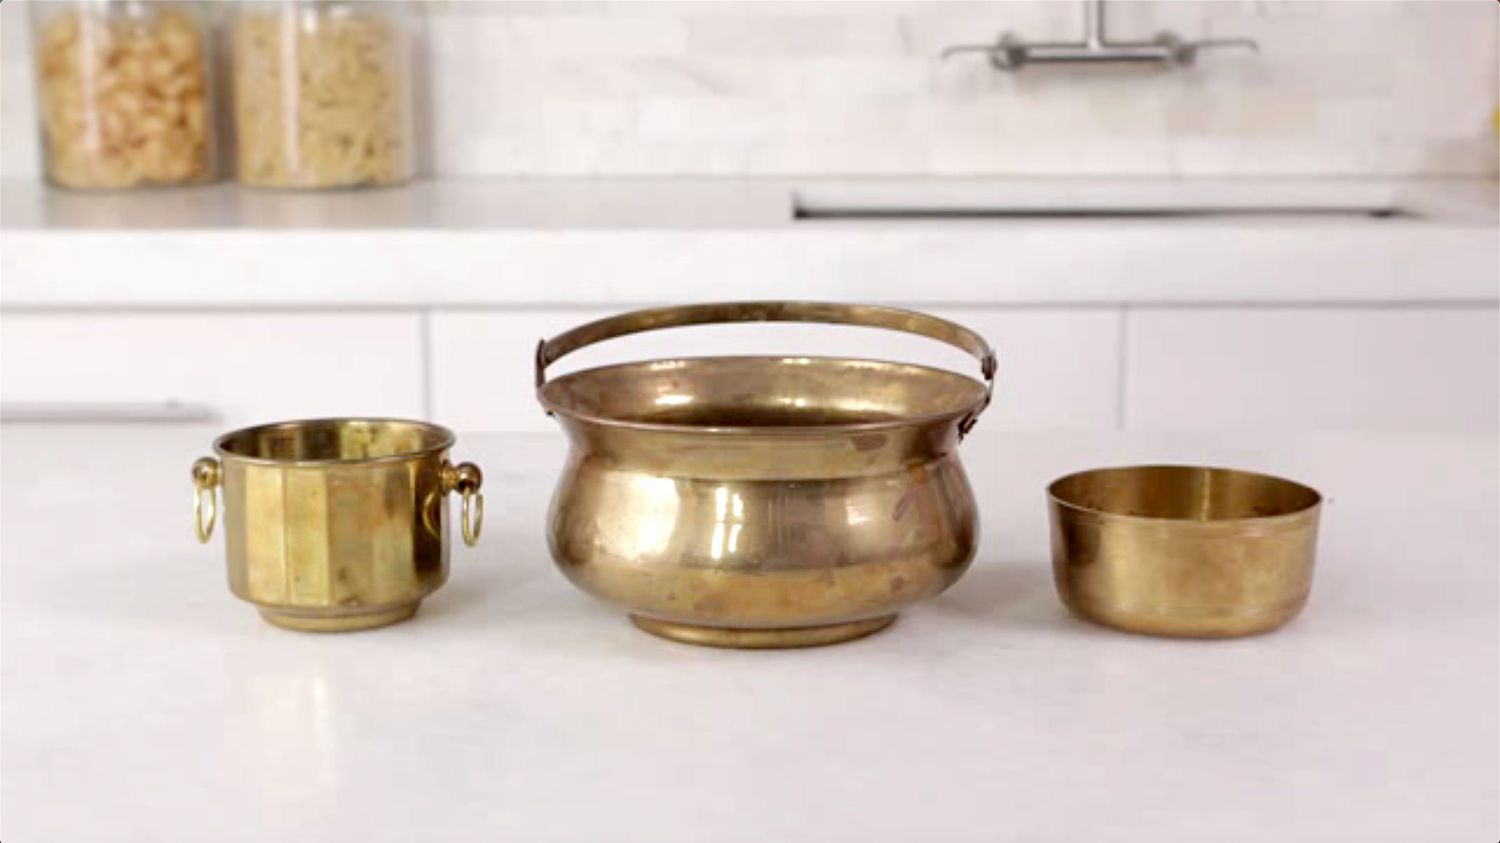 Three brass containers on counter